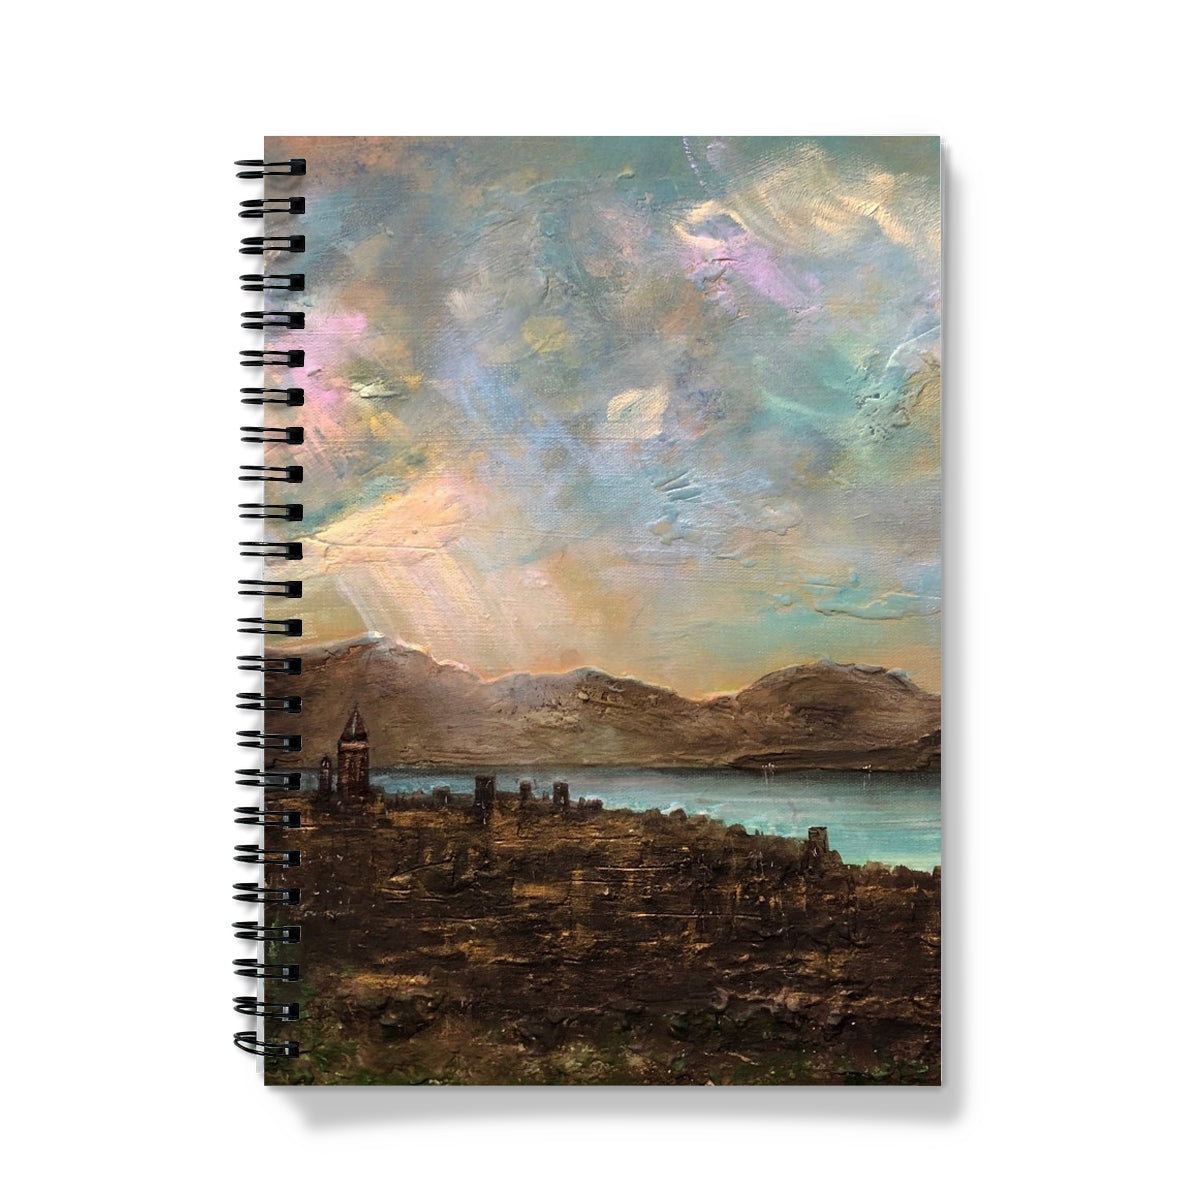 Angels Fingers Over Greenock Art Gifts Notebook-Journals & Notebooks-River Clyde Art Gallery-A5-Lined-Paintings, Prints, Homeware, Art Gifts From Scotland By Scottish Artist Kevin Hunter